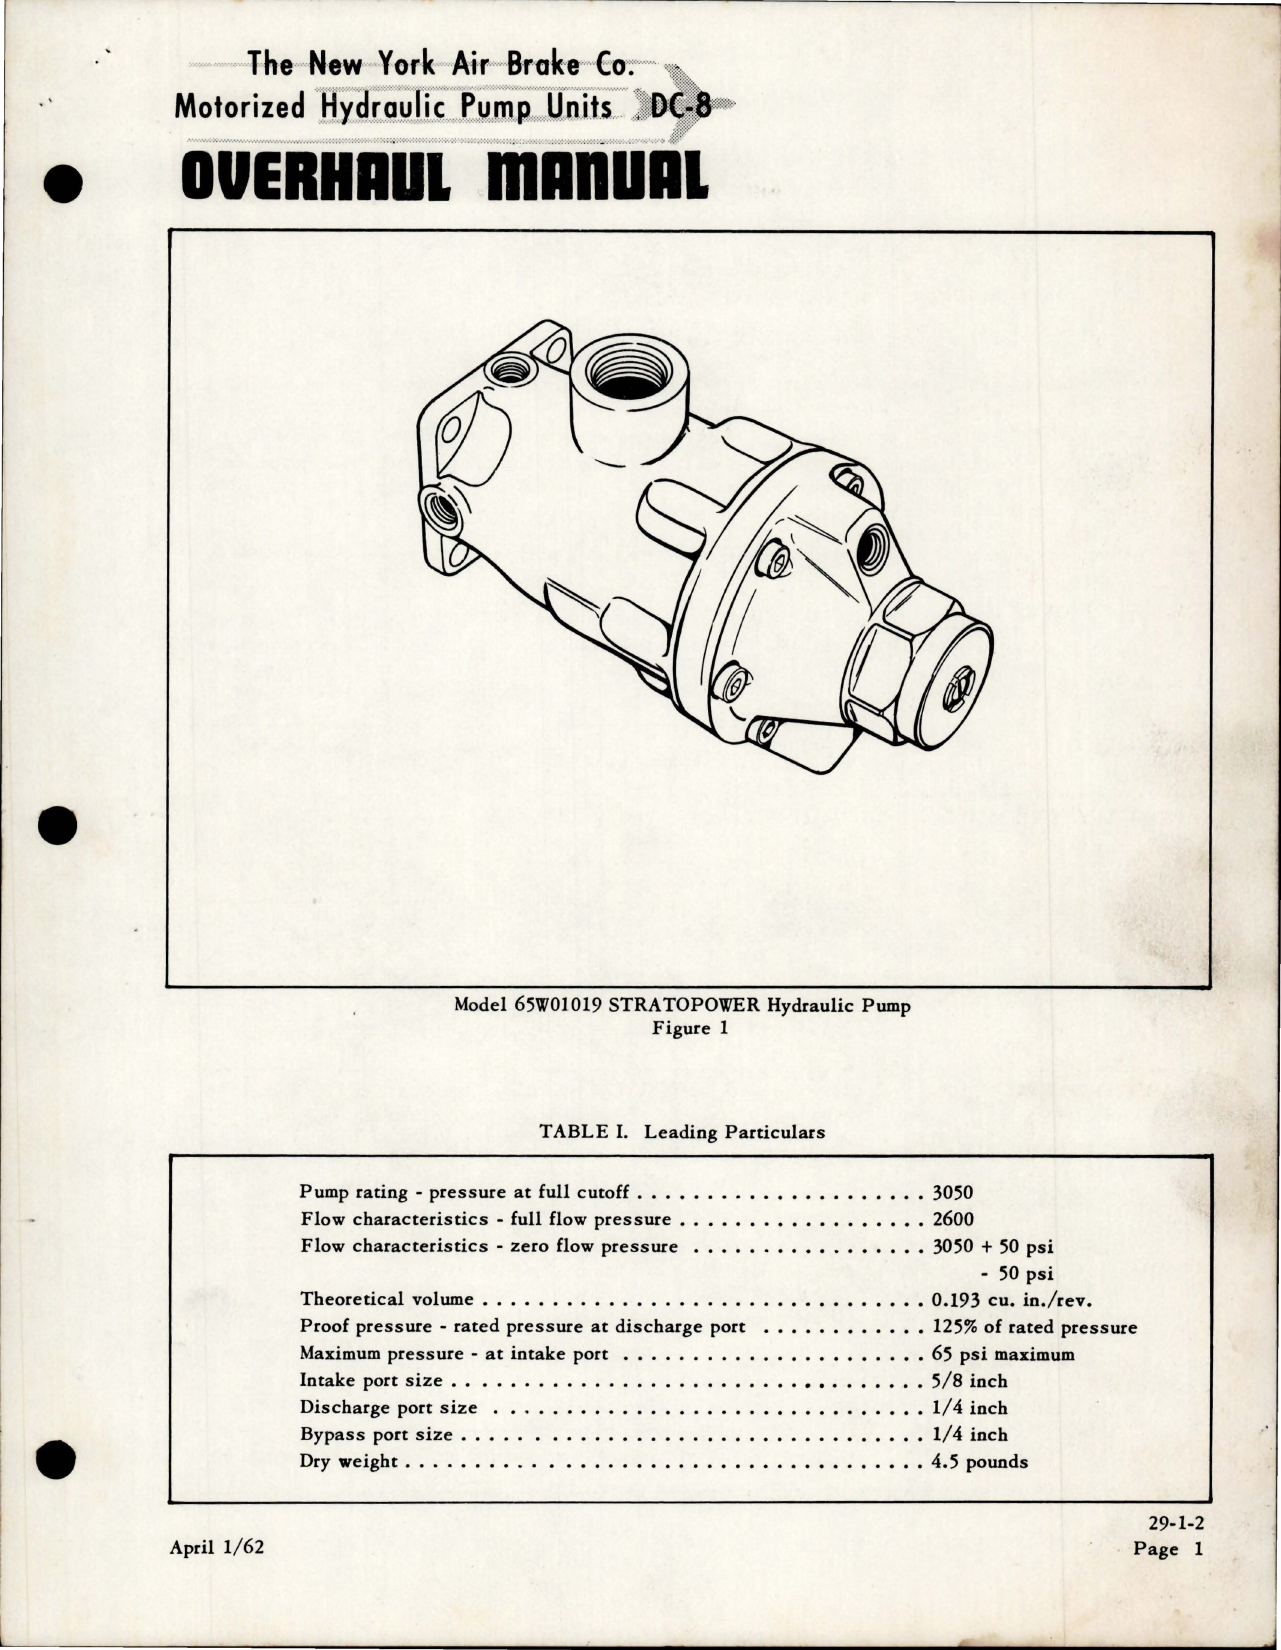 Sample page 9 from AirCorps Library document: Overhaul Manual for Stratopower Motorized Hydraulic Pumps - Models 165W01004-4 and 165W01010-1 